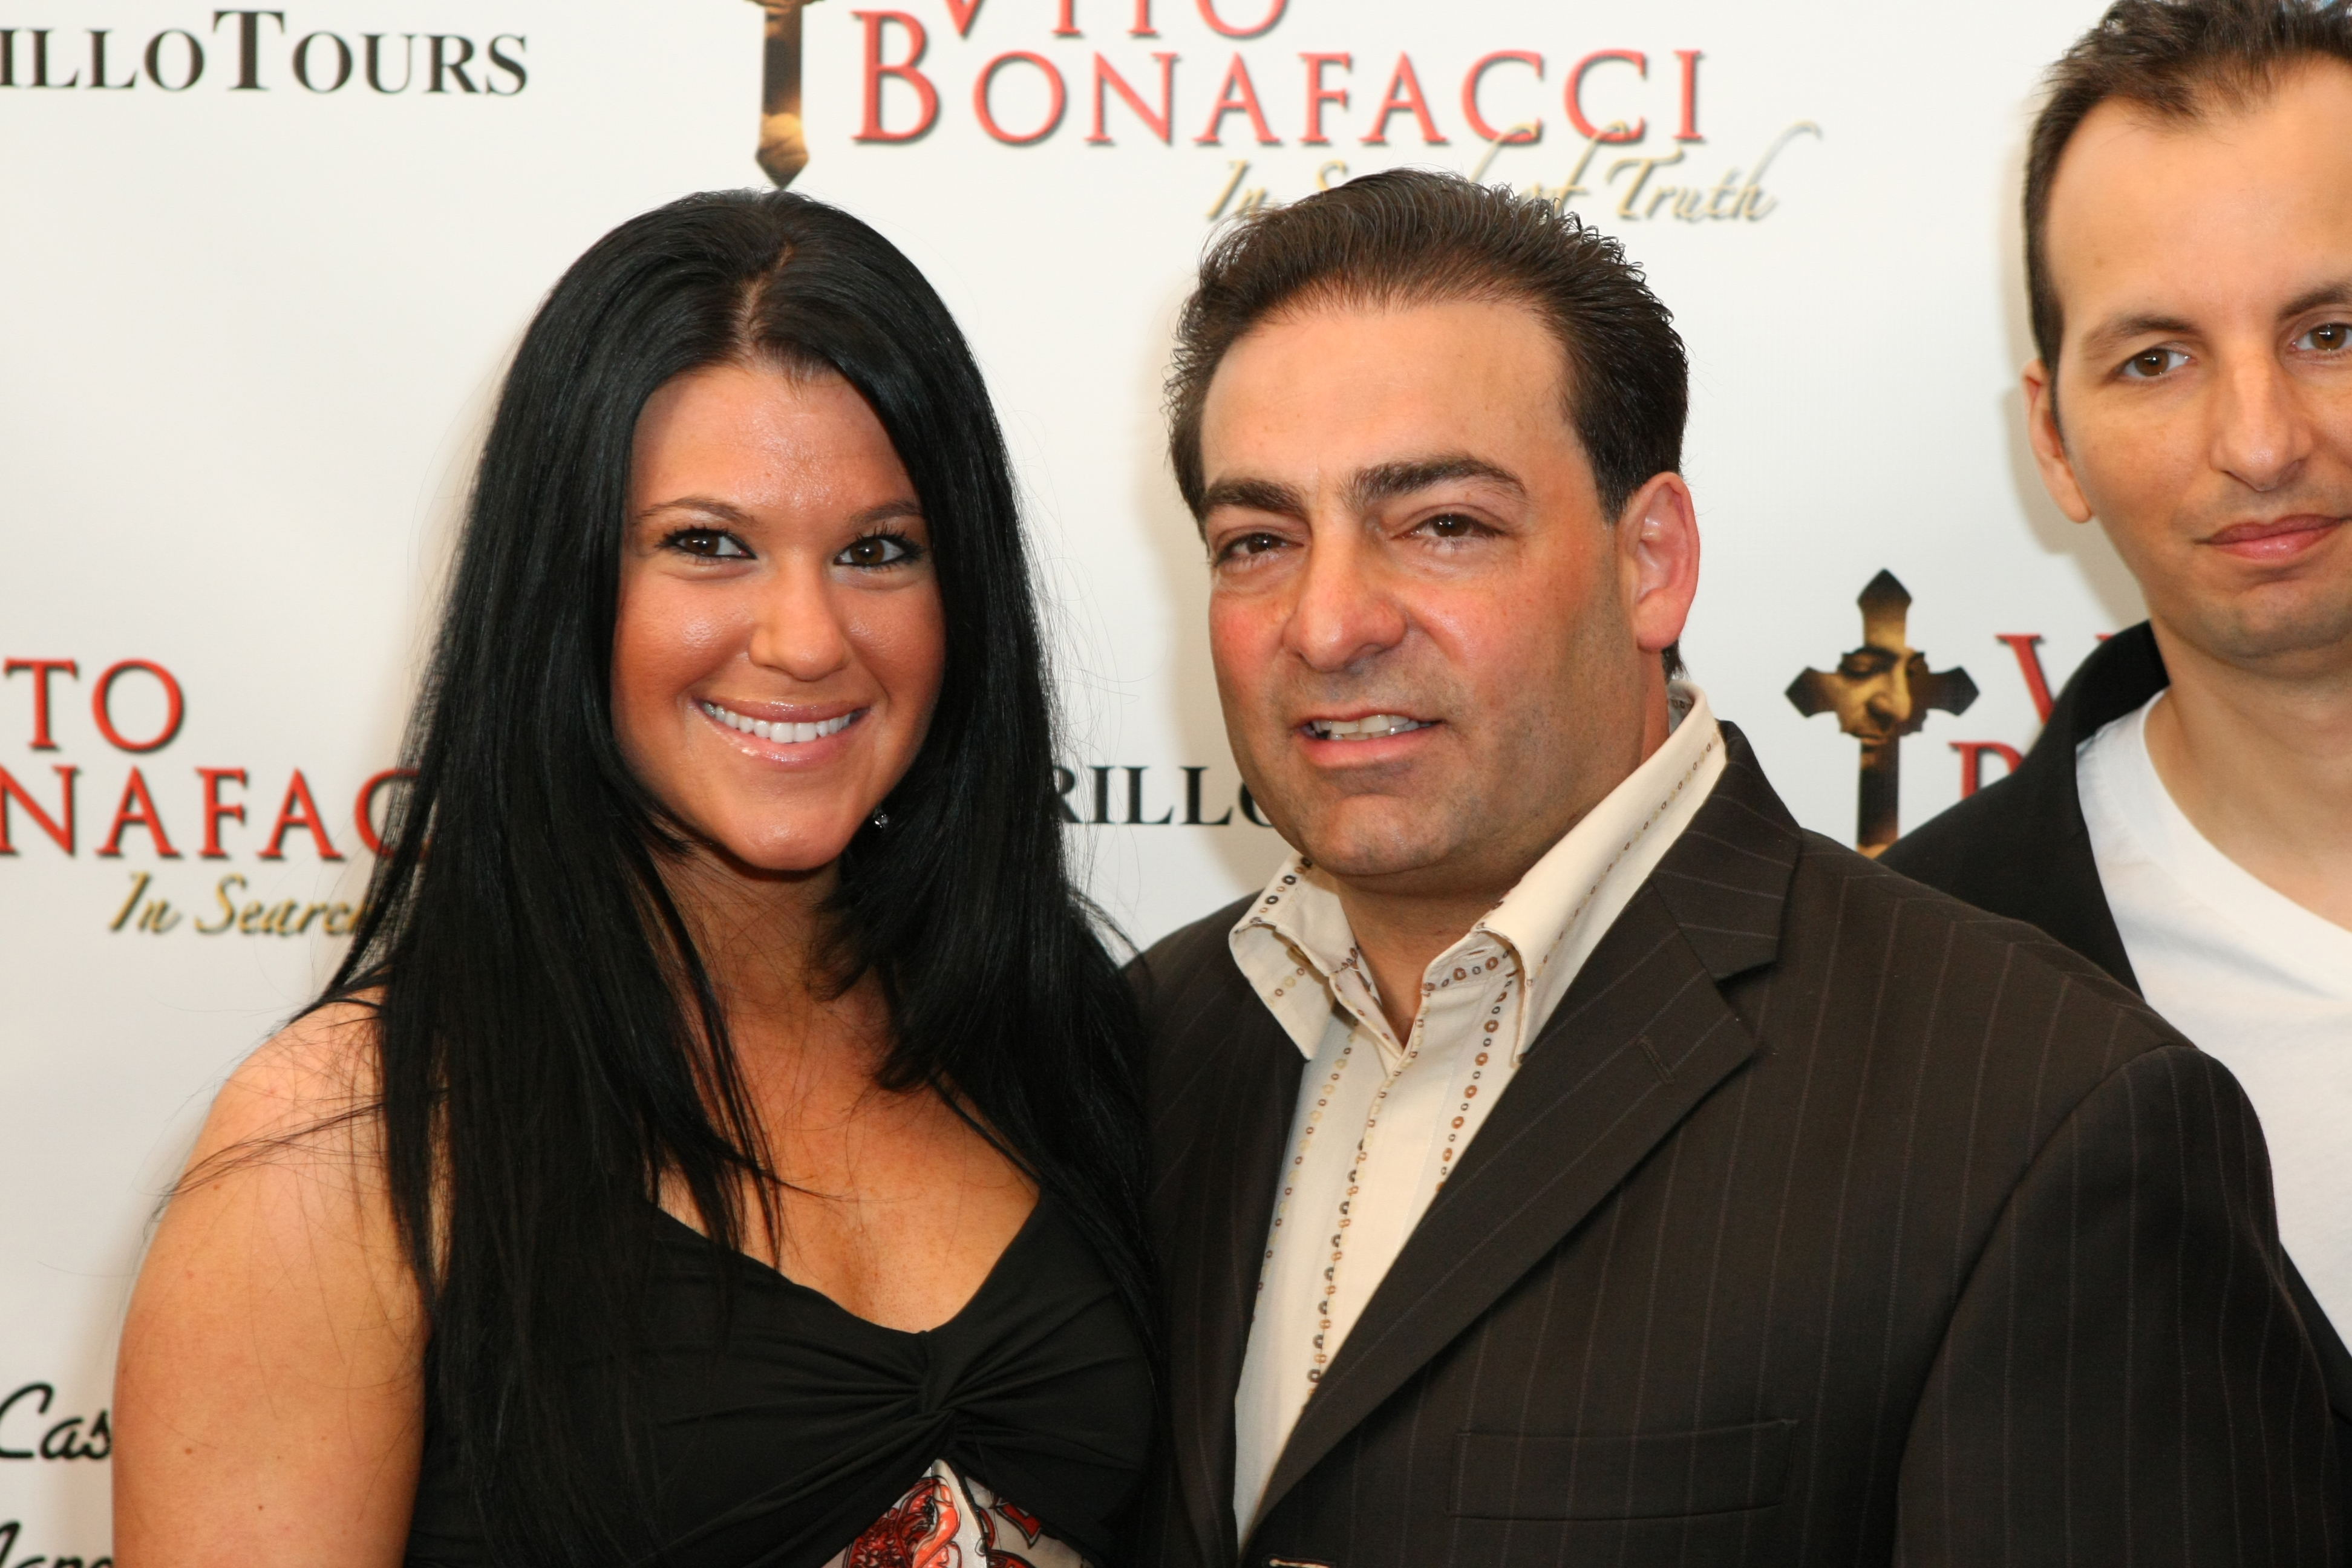 With Leigh Pupps (left) and Louis Vanaria (right), at the NY premiere of VITO BONAFACCI.